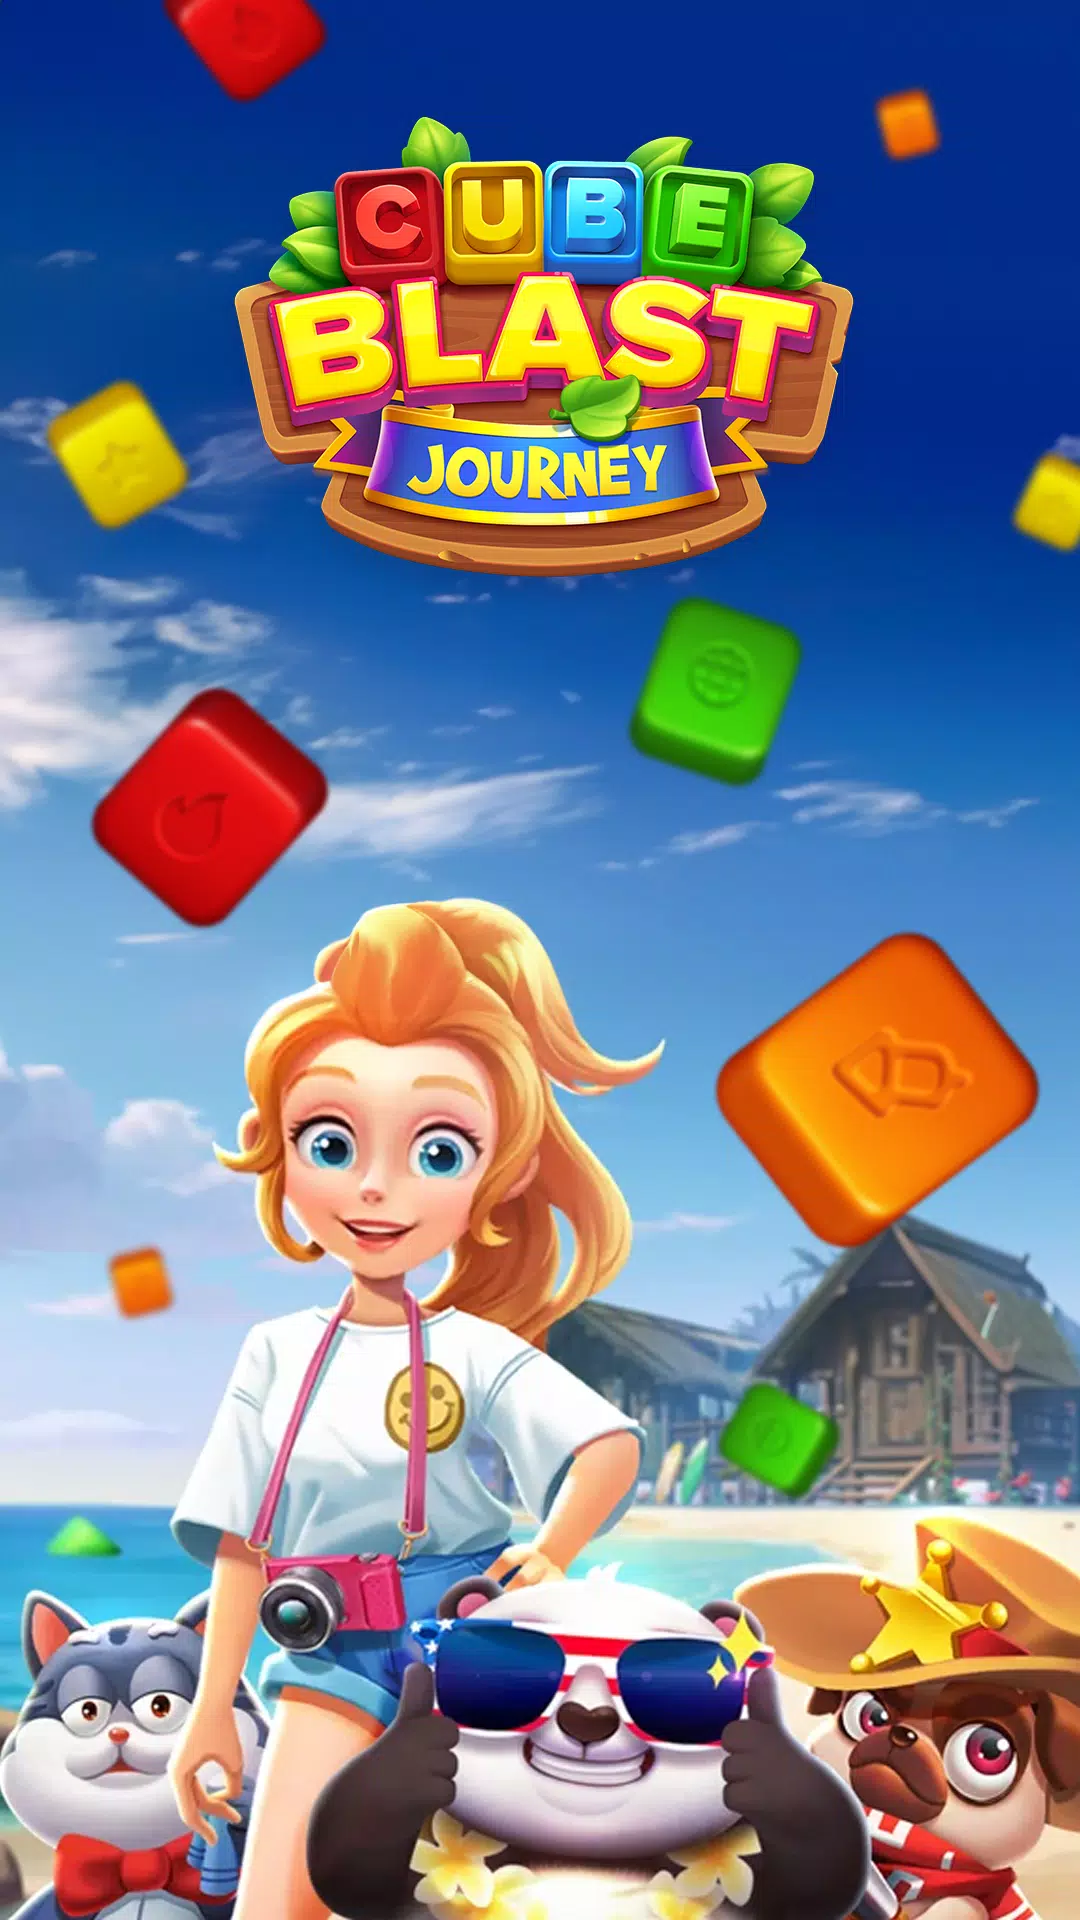 Cube Meet APK for Android Download